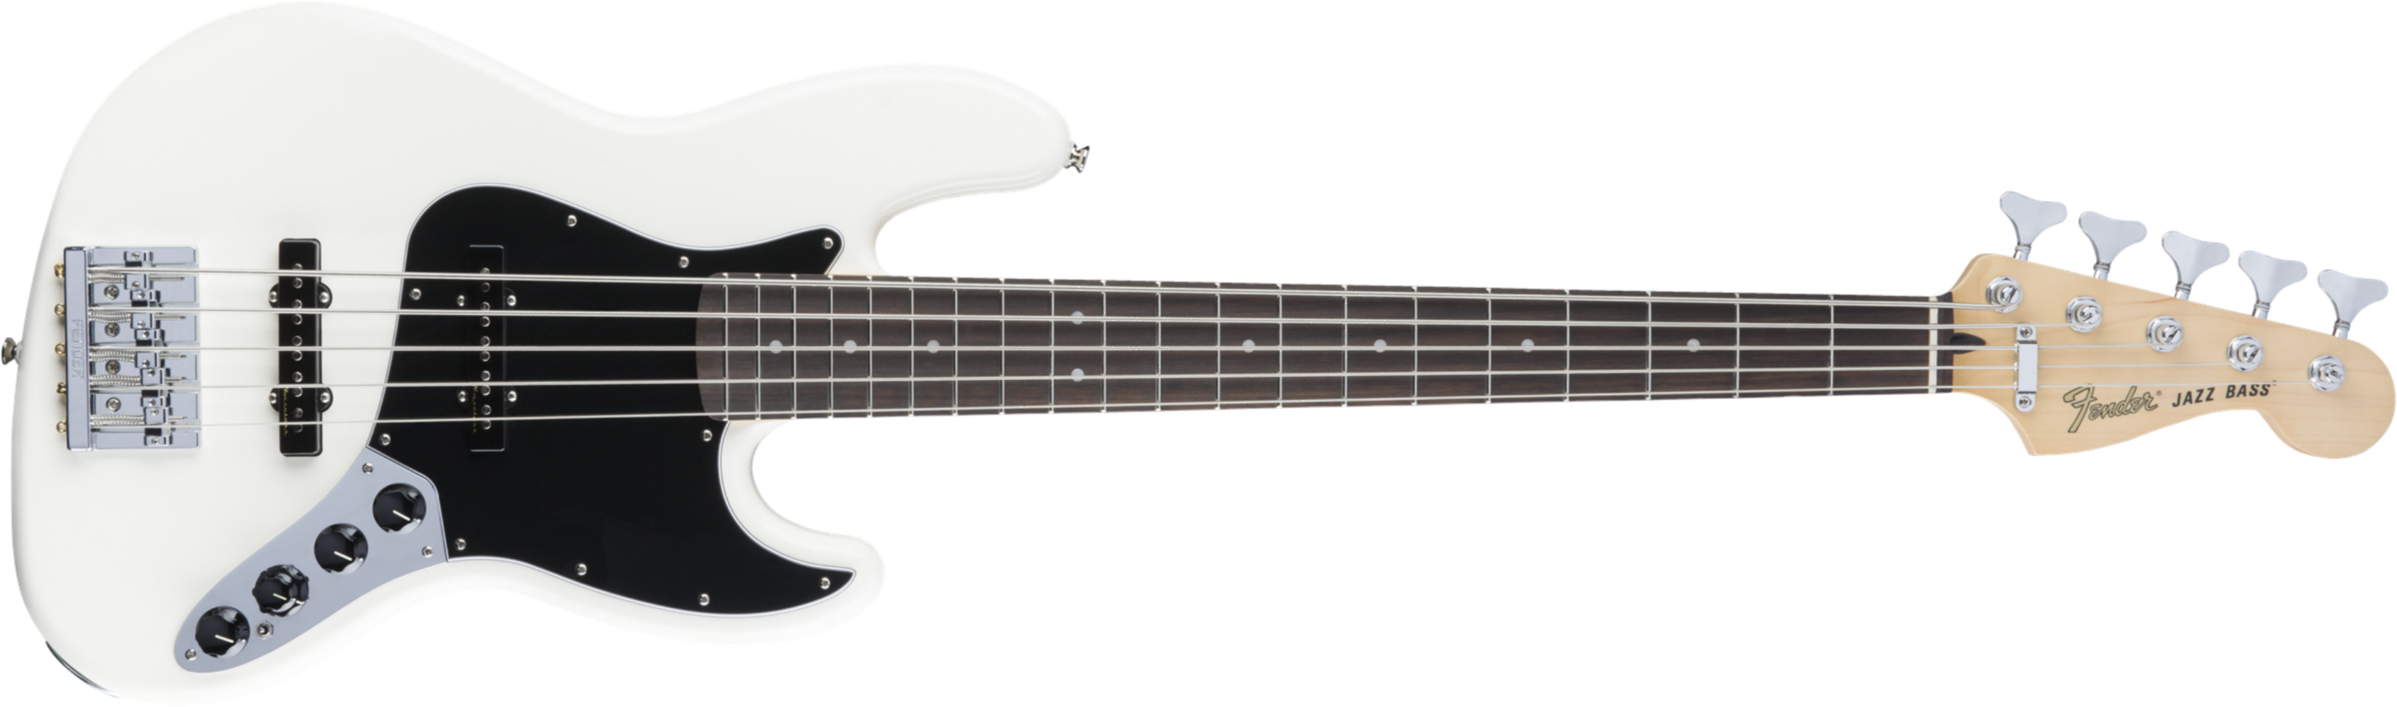 Fender Jazz Bass Deluxe Active Pf - Olympic White - Solidbody E-bass - Main picture